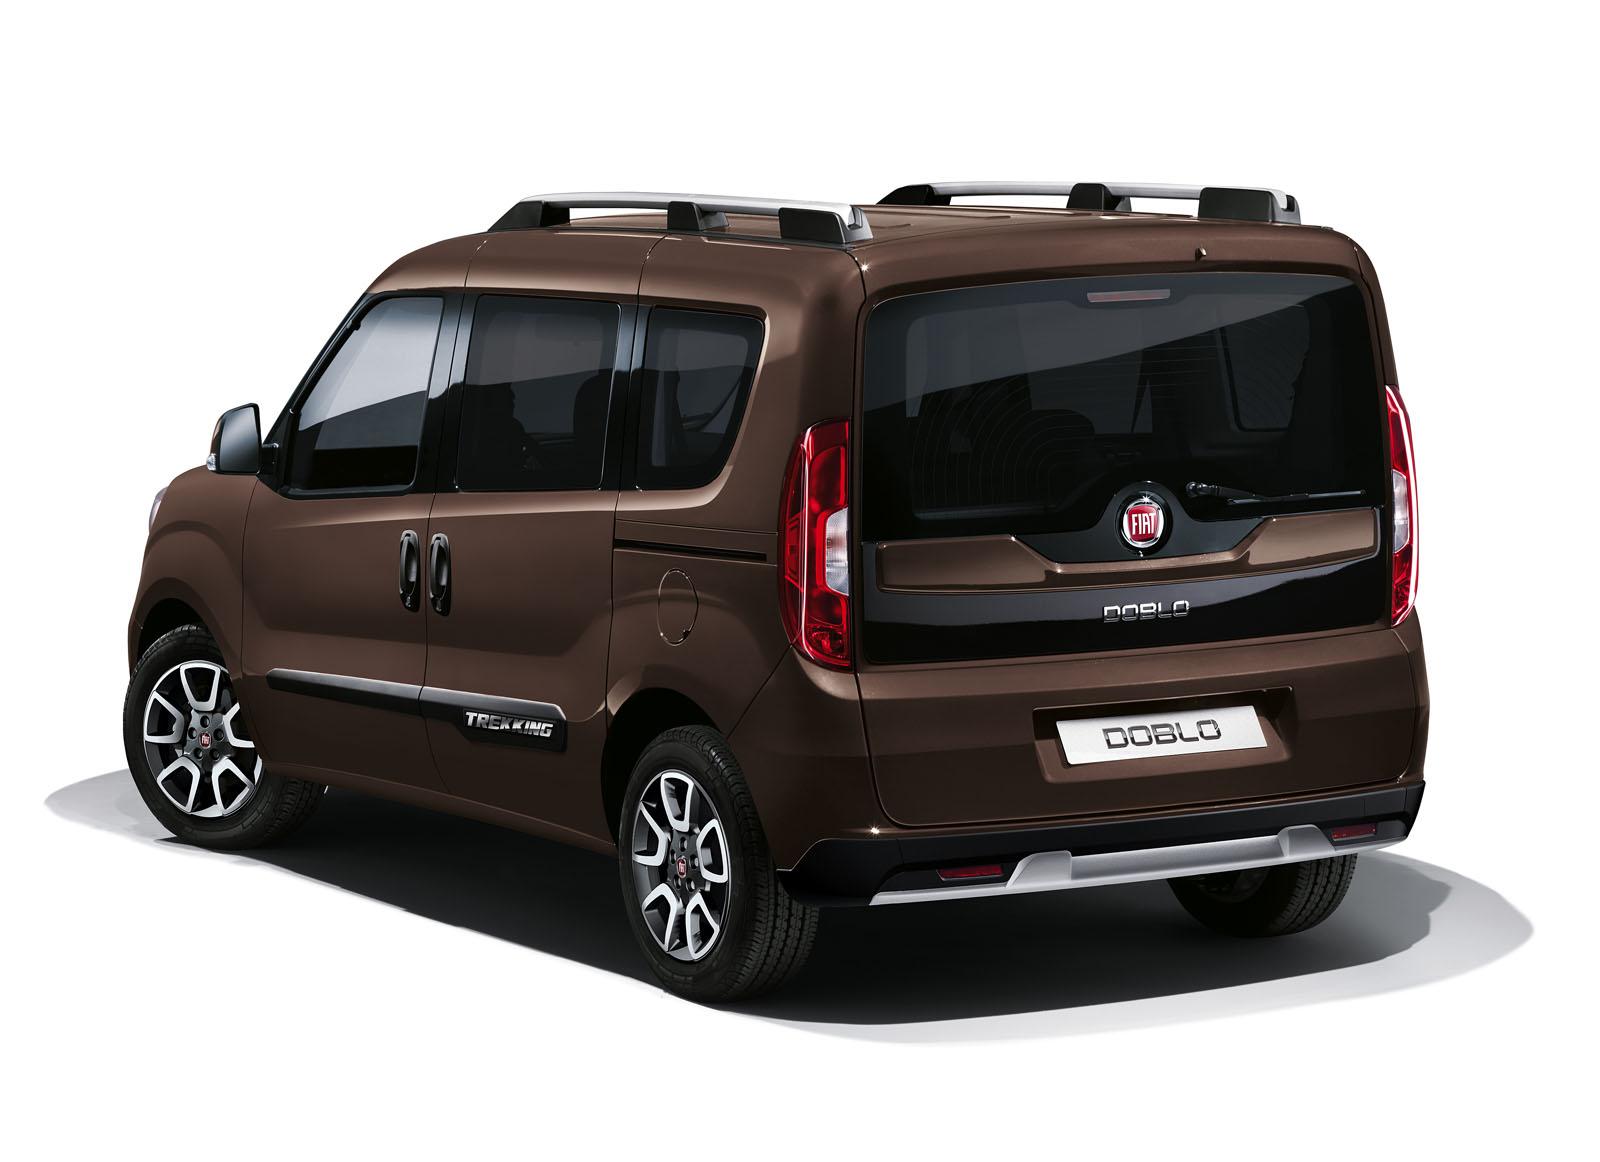 Fiat Doblo Trekking Gets 10 mm of Extra Ground Clearance